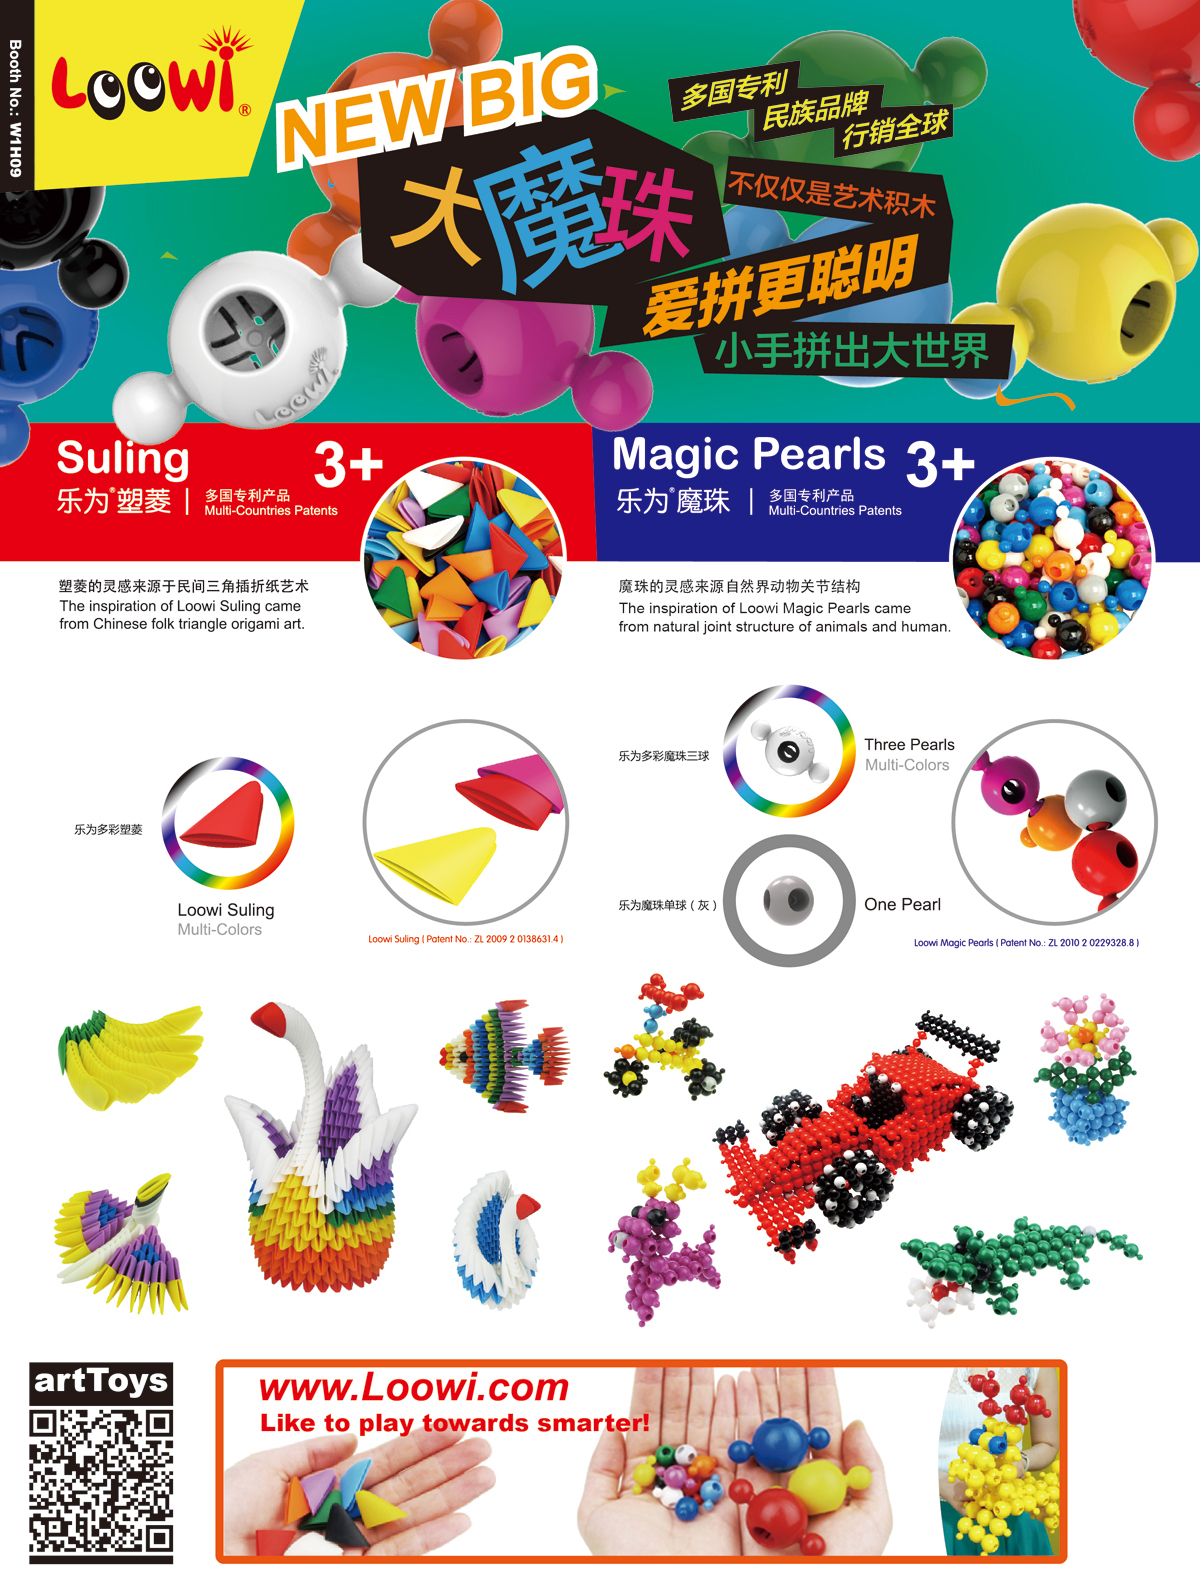 2014 China Toys Fair, Sponser: China Toy & Juvenlle Products Association, Shanghai New International Expo CentreOct.14-16th, Loowi artToys, Stand Booth: W1H09